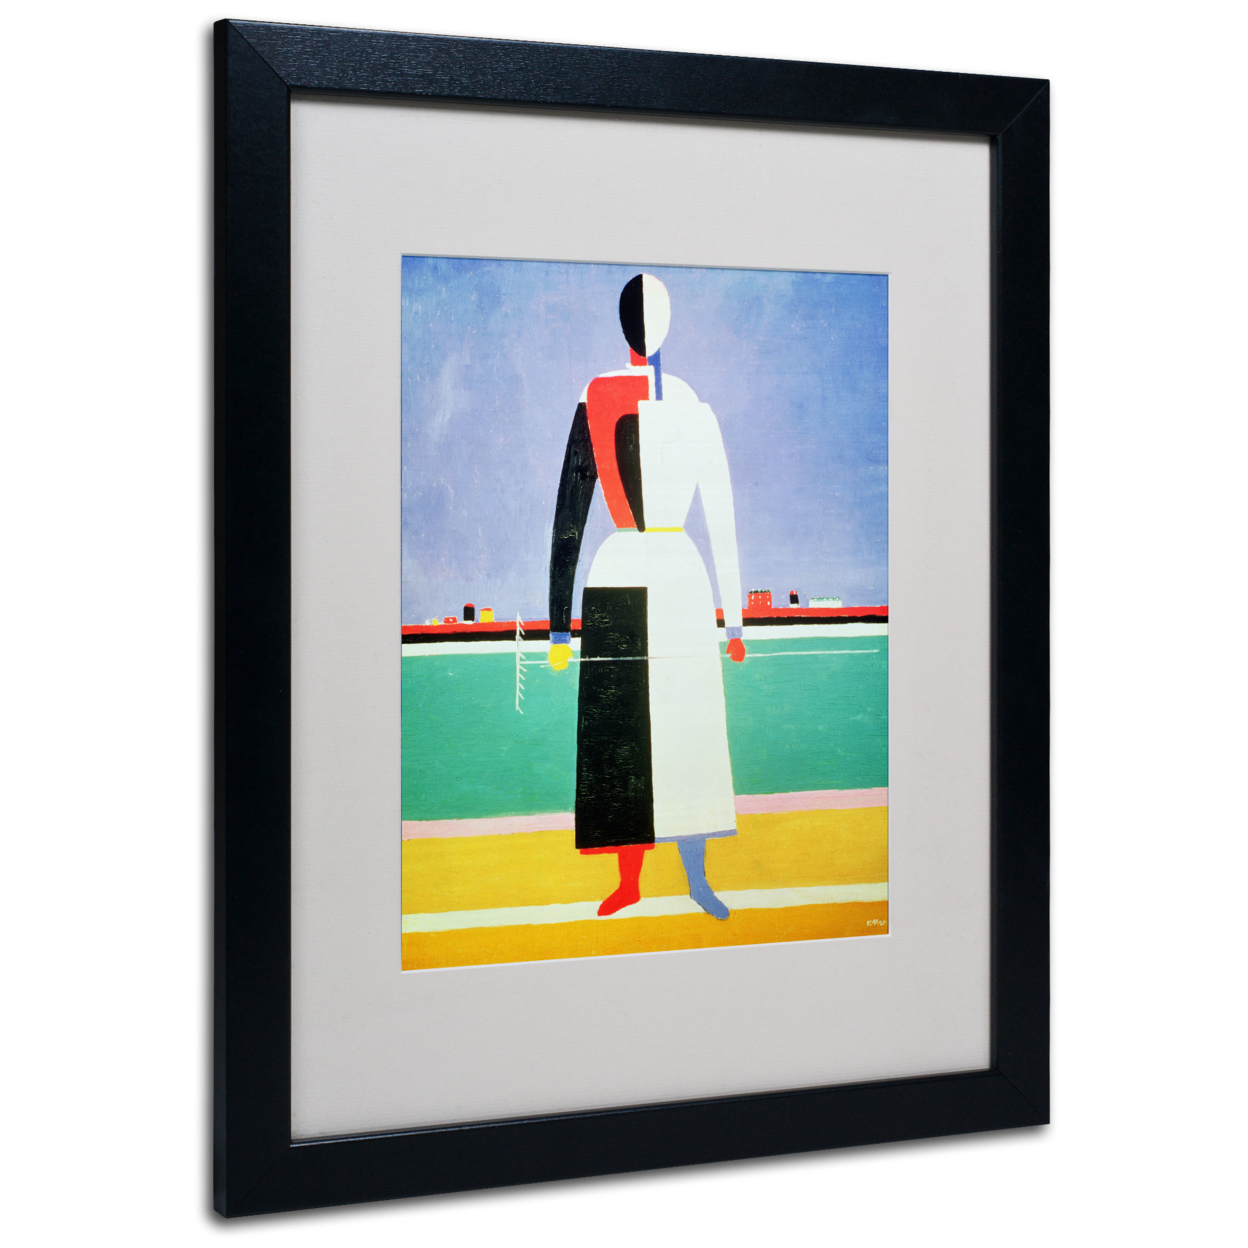 Kazimir Malevich 'Woman With Rake 1928-32' Black Wooden Framed Art 18 X 22 Inches